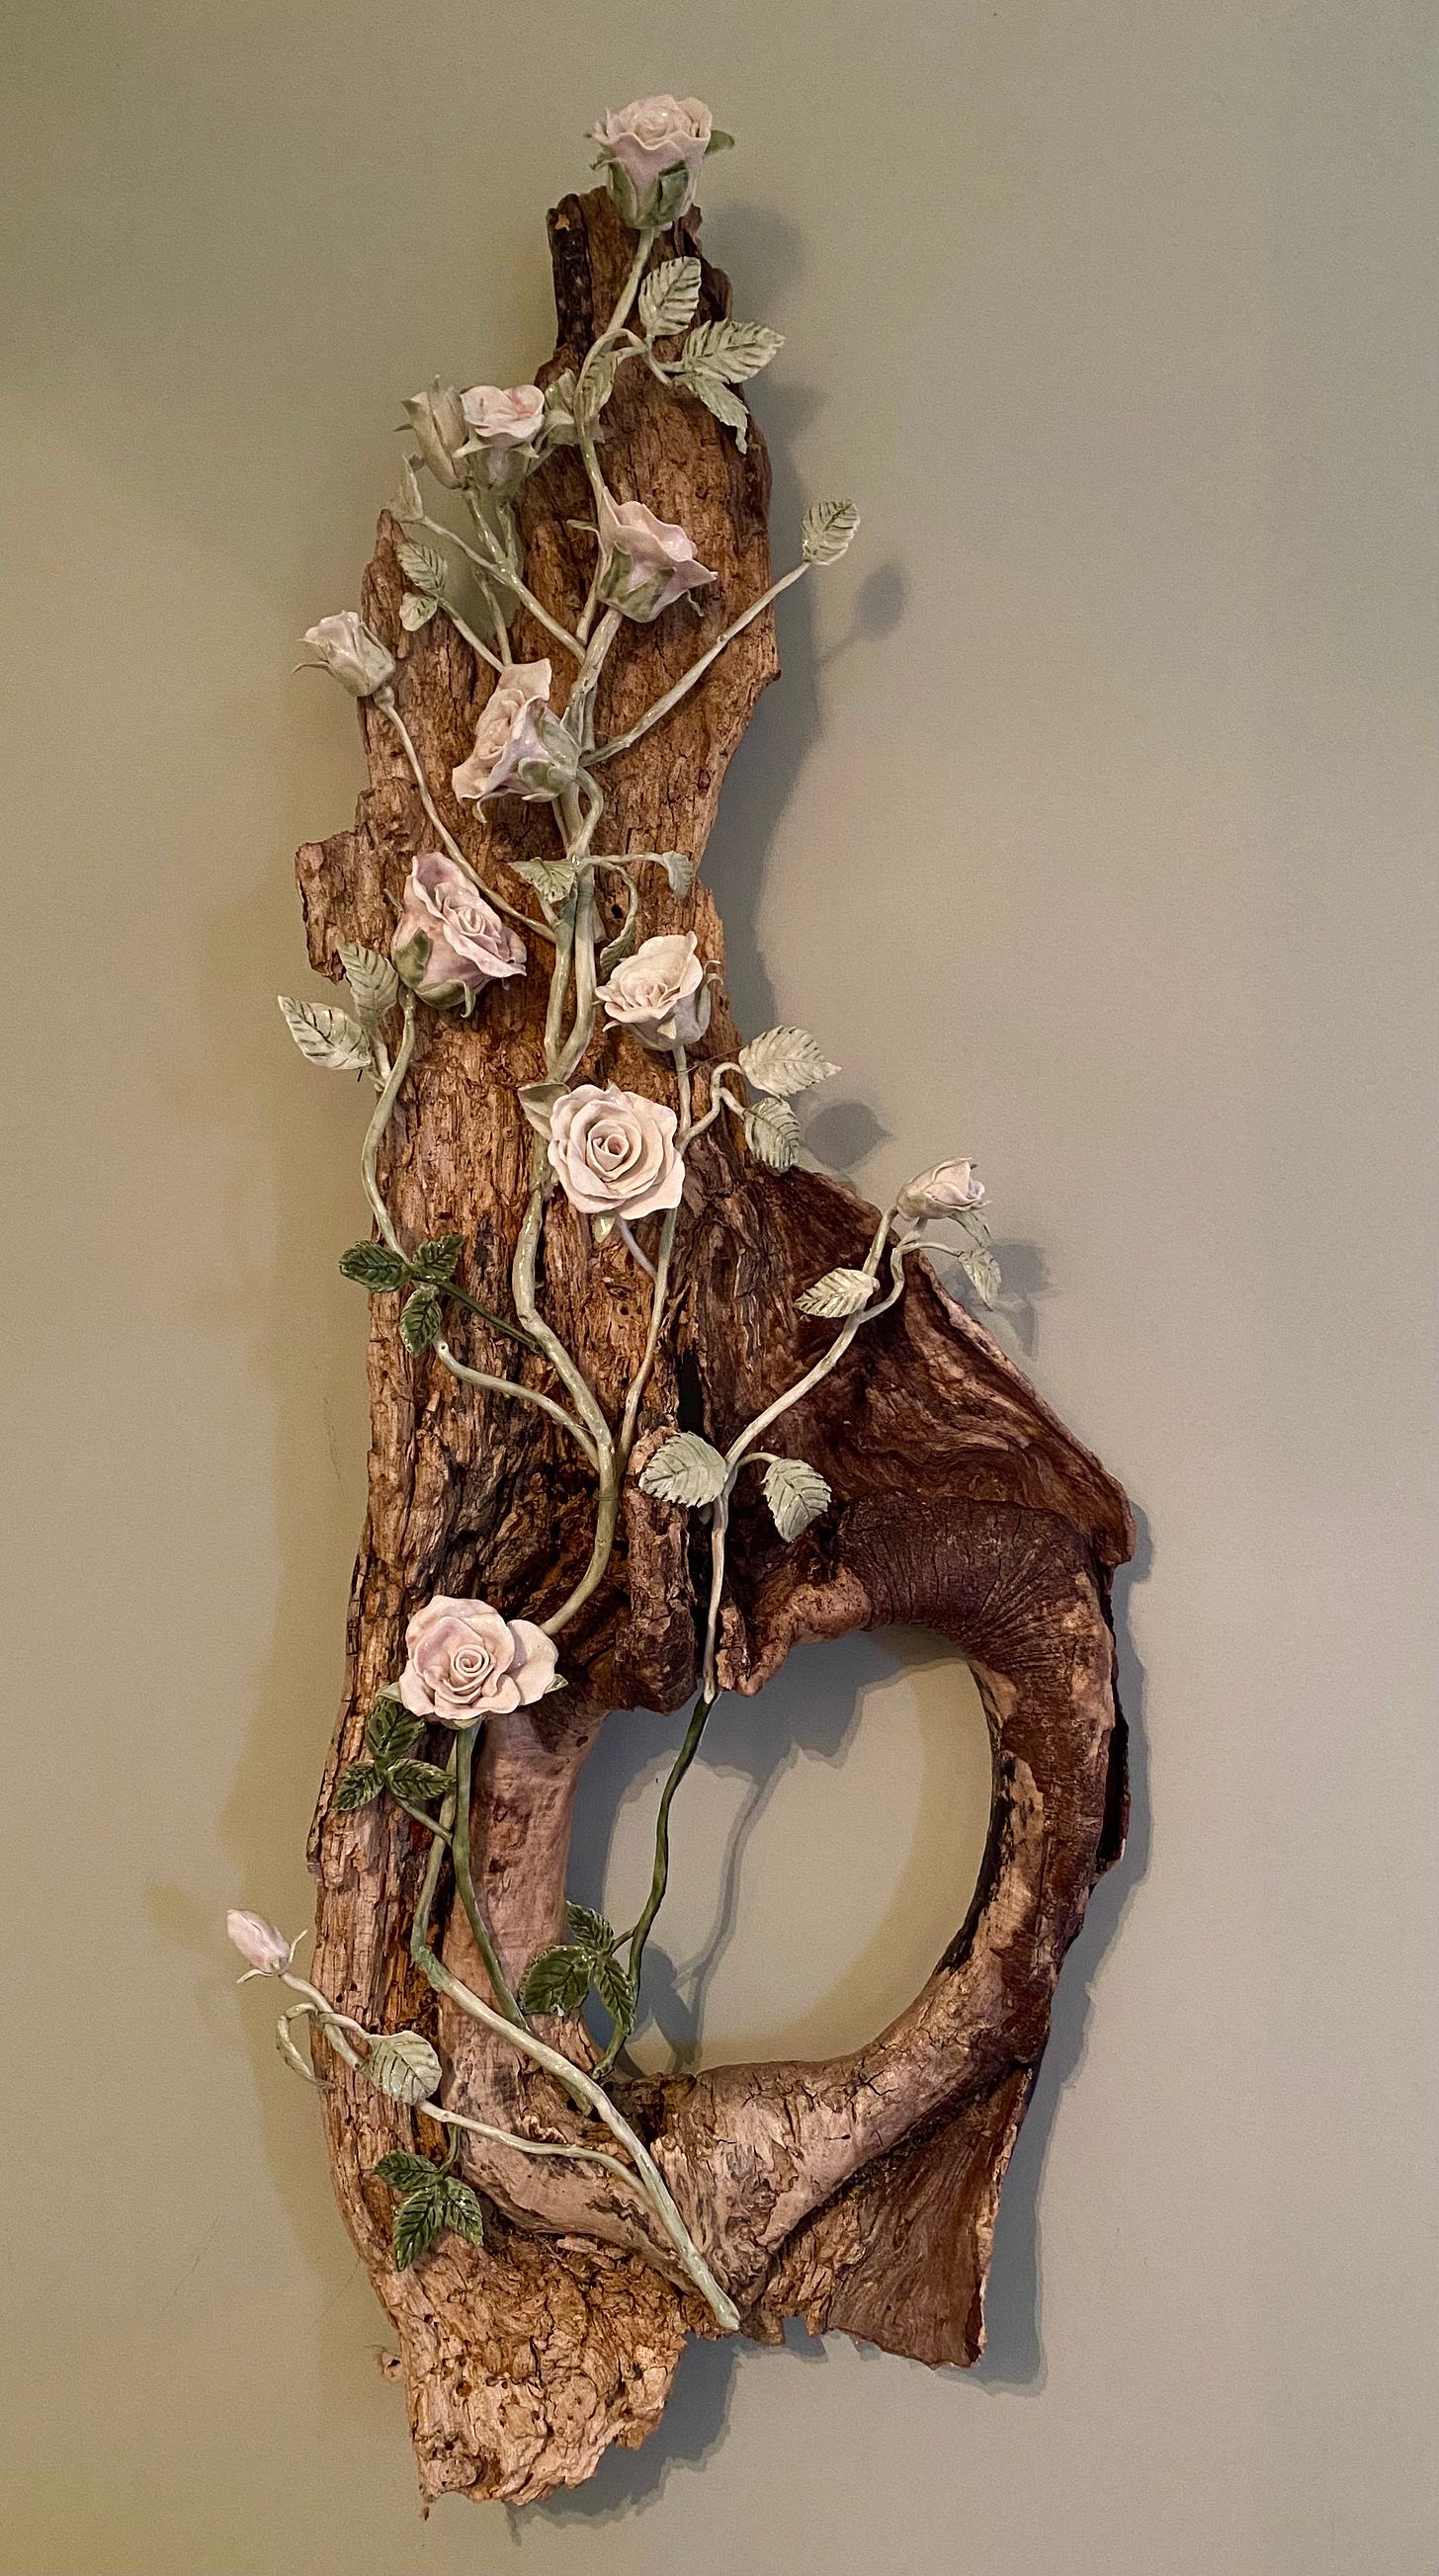 Wood & Roses by JHB 2020